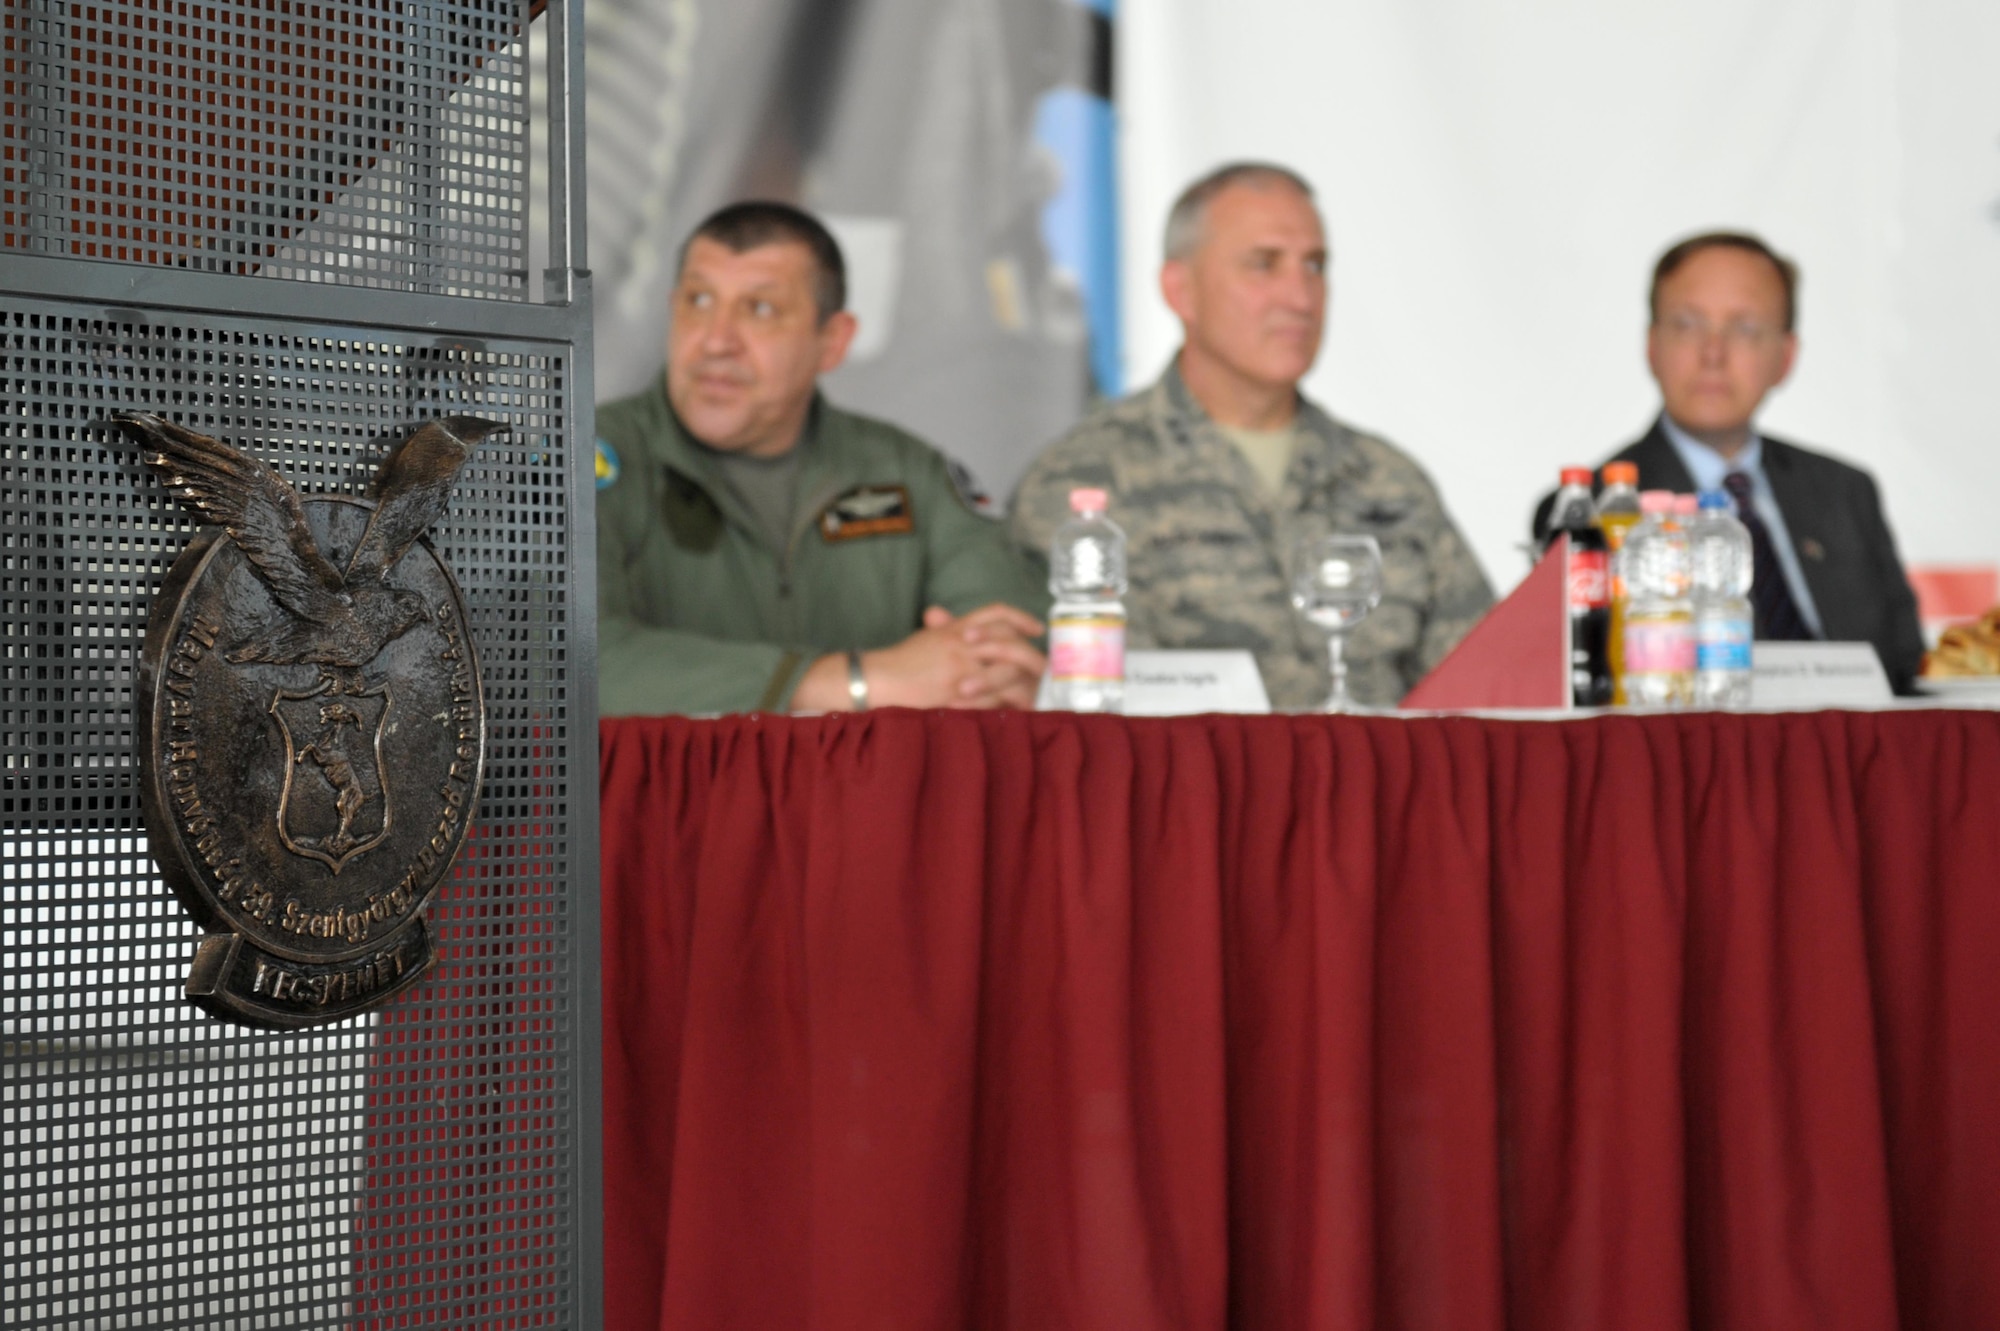 Brig. Gen. Csaba Ugrik, commander of 59th Air Base, Brig. Gen. Stephen Markovich, commander of the Ohio Air National Guard, and Mr. David Kostelancik, chargé d’ affaires for the U.S. Embassy in Hungary, listen as Gen. Tod Wolters speaks during a ceremony June 2, in Kecskemét, Hungary. Approximately 400 military members from the United States, Hungary, Croatia, Slovakia, Slovenia and Czech Republic, including 200 Airmen from the Ohio National Guard, are participating in the largest air-to-air and air-to-ground exercise in Hungary, focused on conducting military-to-military engagements, interoperability and maintaining joint readiness.